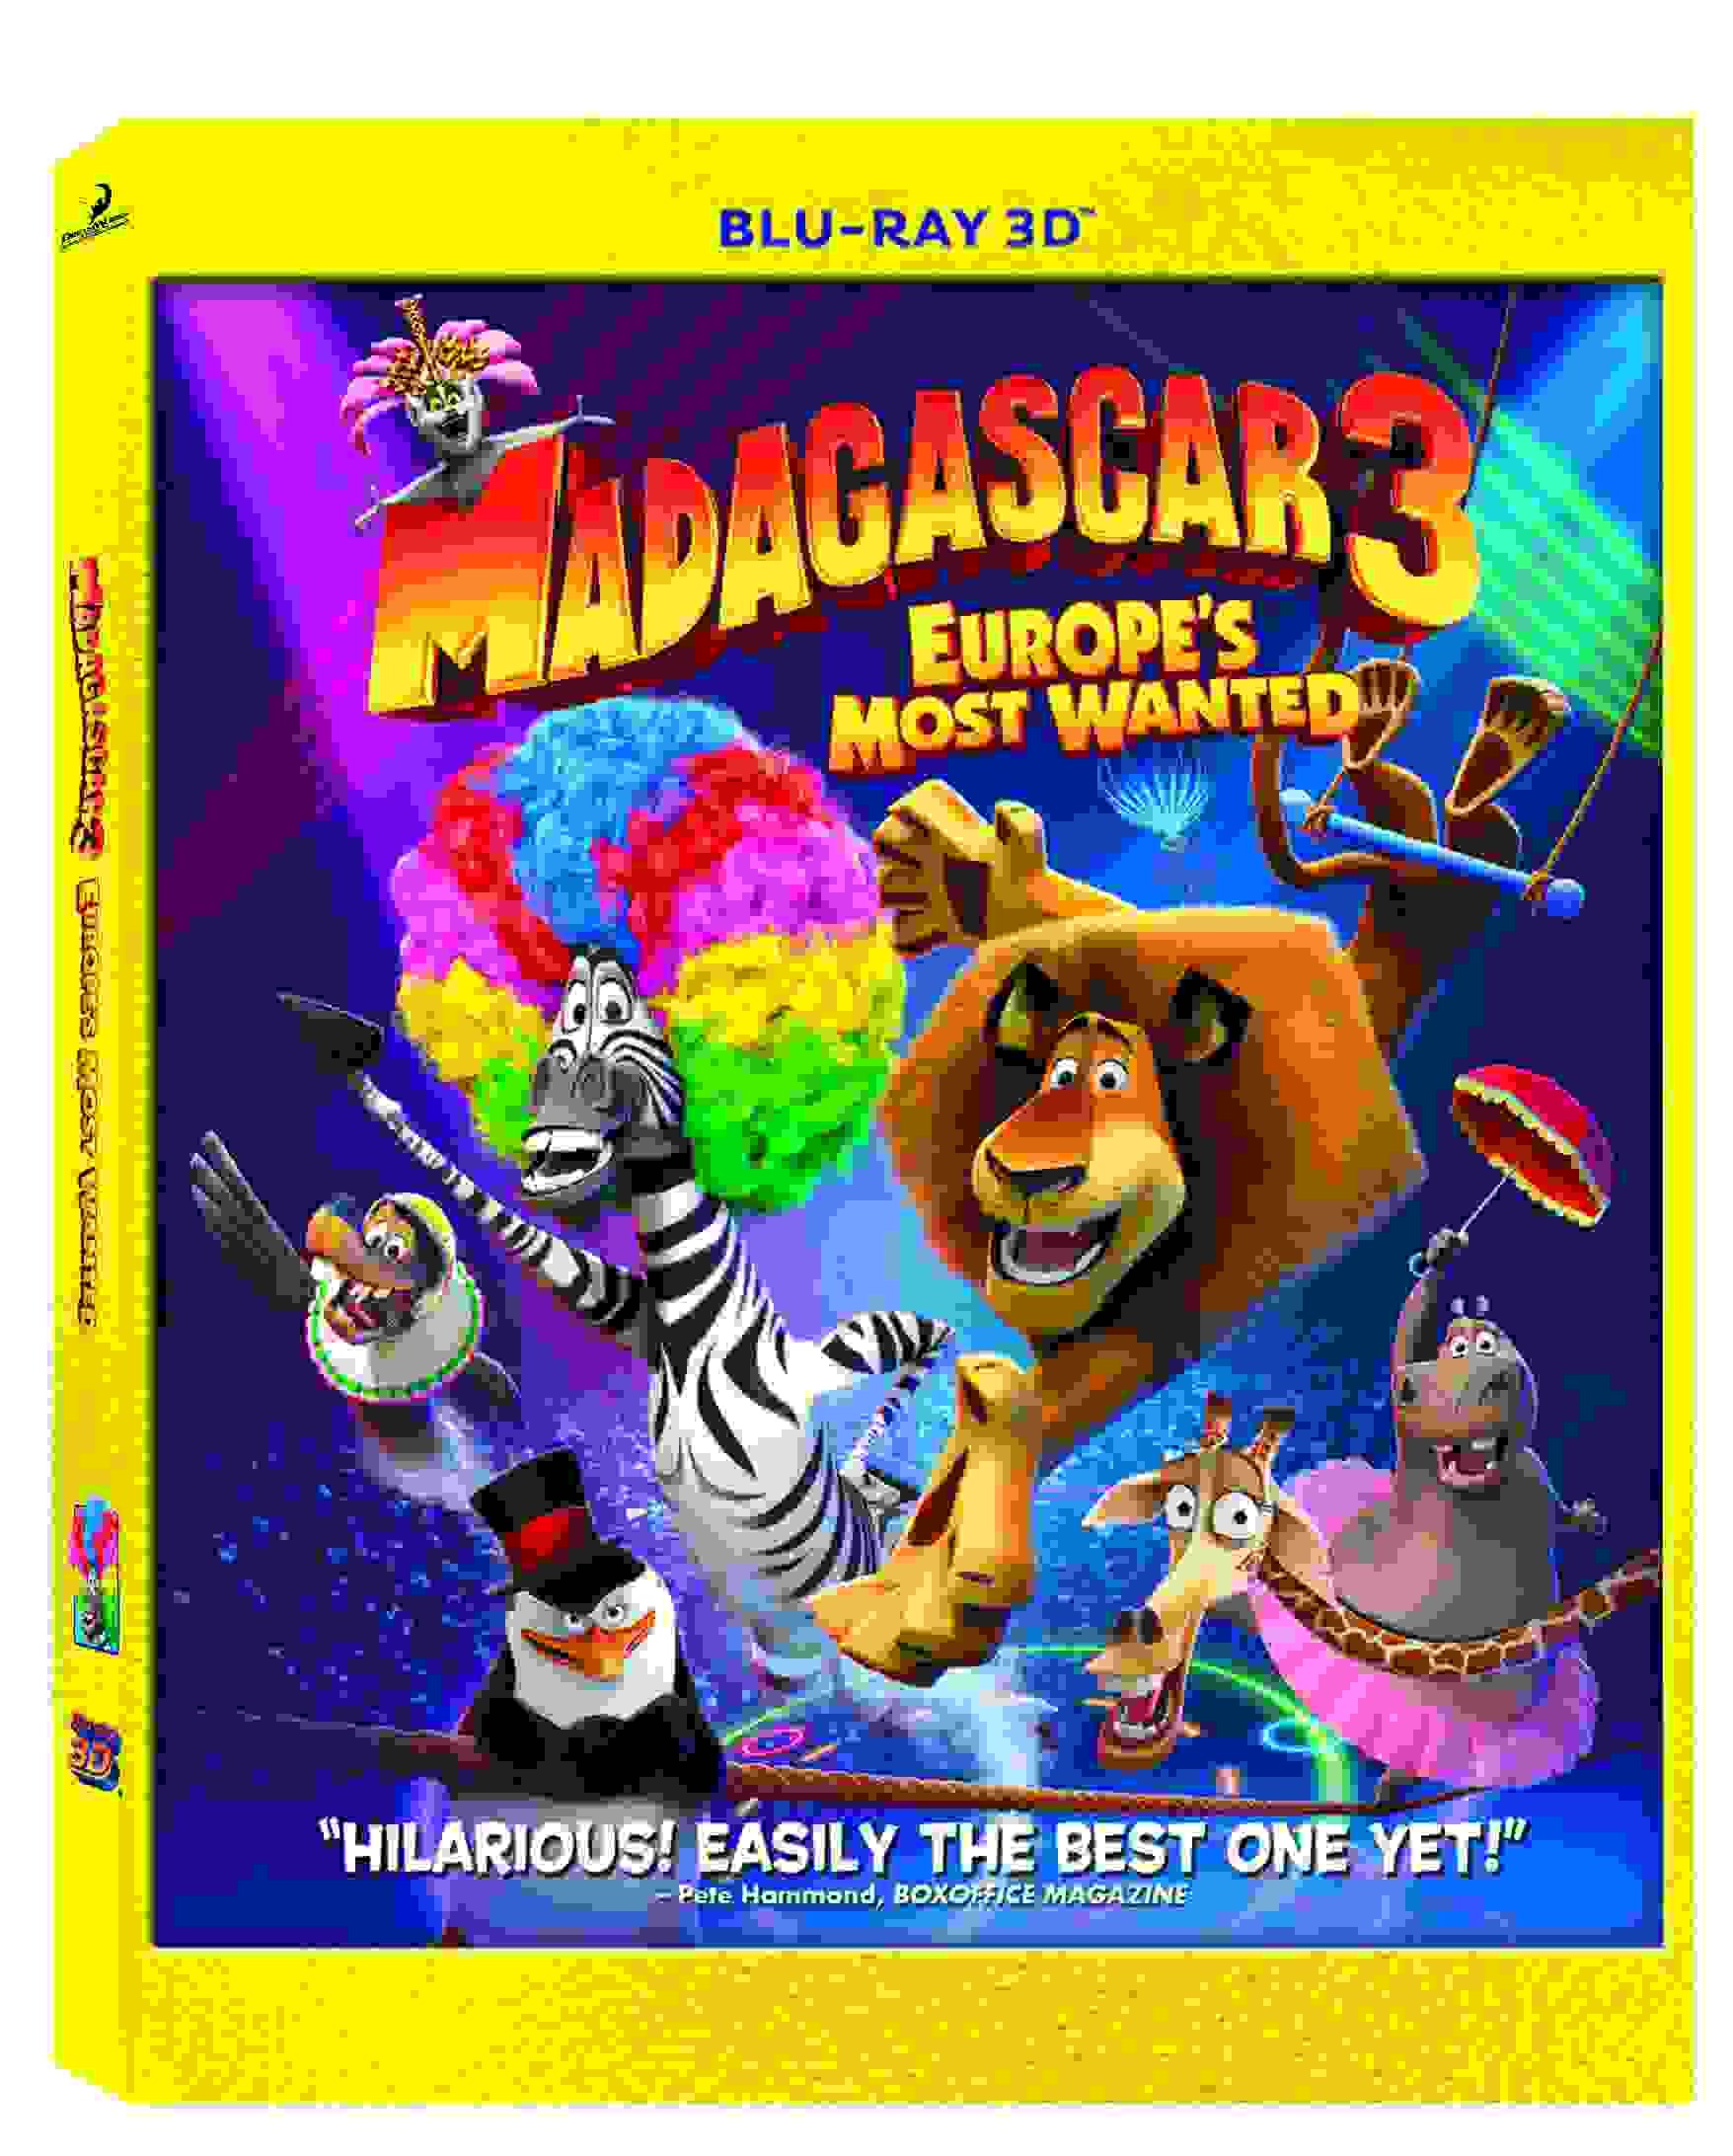 madagascar-3-europes-most-wanted-blu-ray-3d-movie-purchase-or-wat